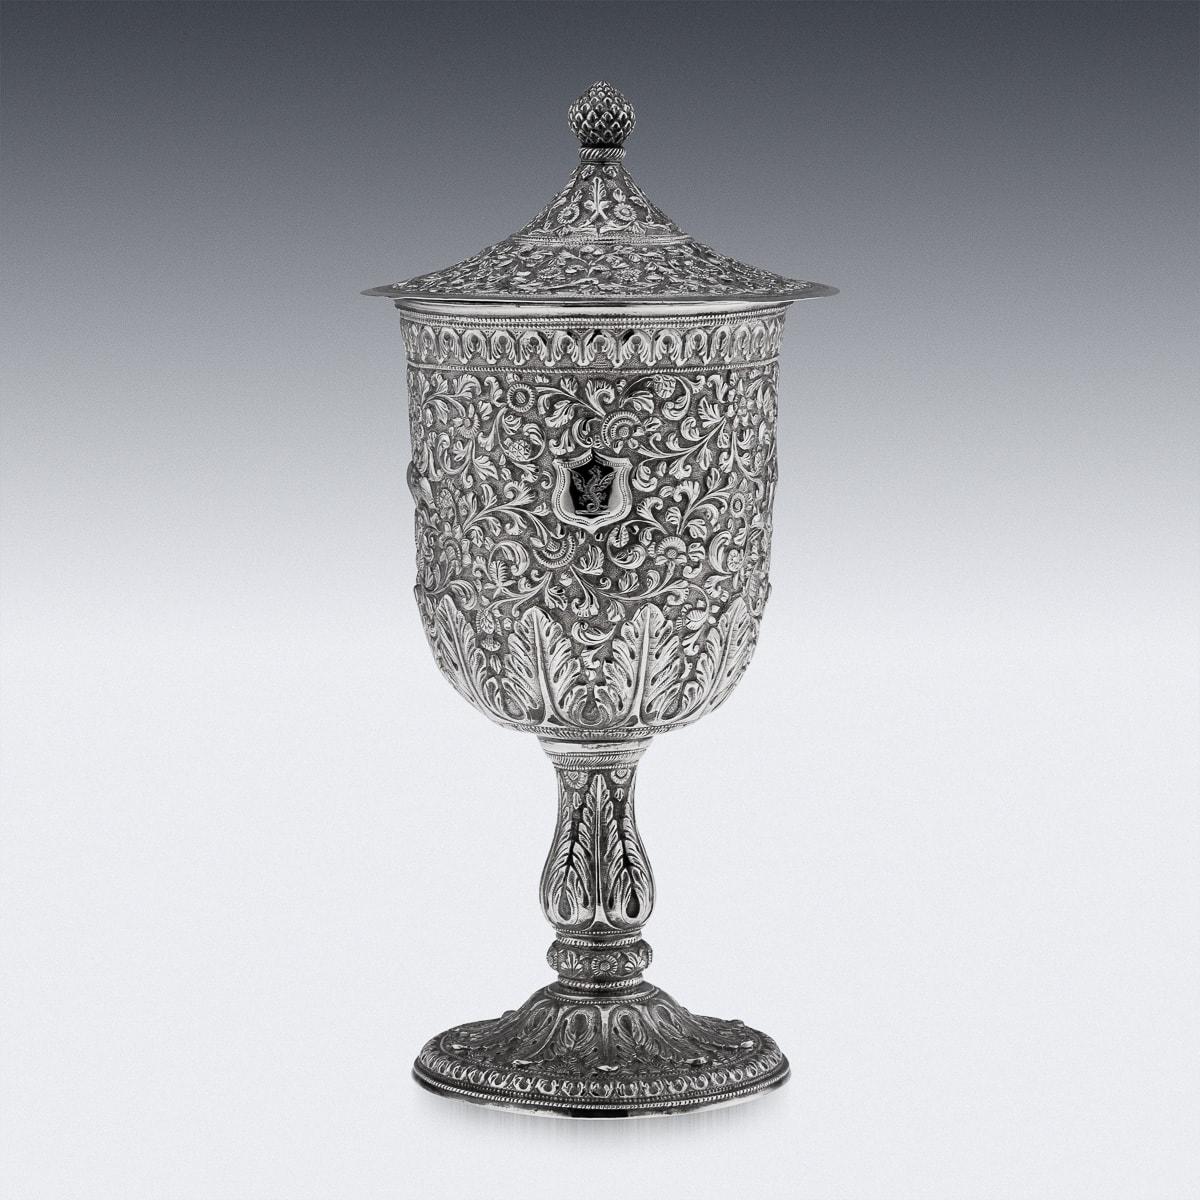 Antique 19th Century Indian Kutch (Cutch), Bhuj, Gujarat region, beautifully hand crafted solid silver lidded goblet, all over finely chased with scrolling leaves, scroll patterns on a finely tooled on matted ground, the main body depicting wild